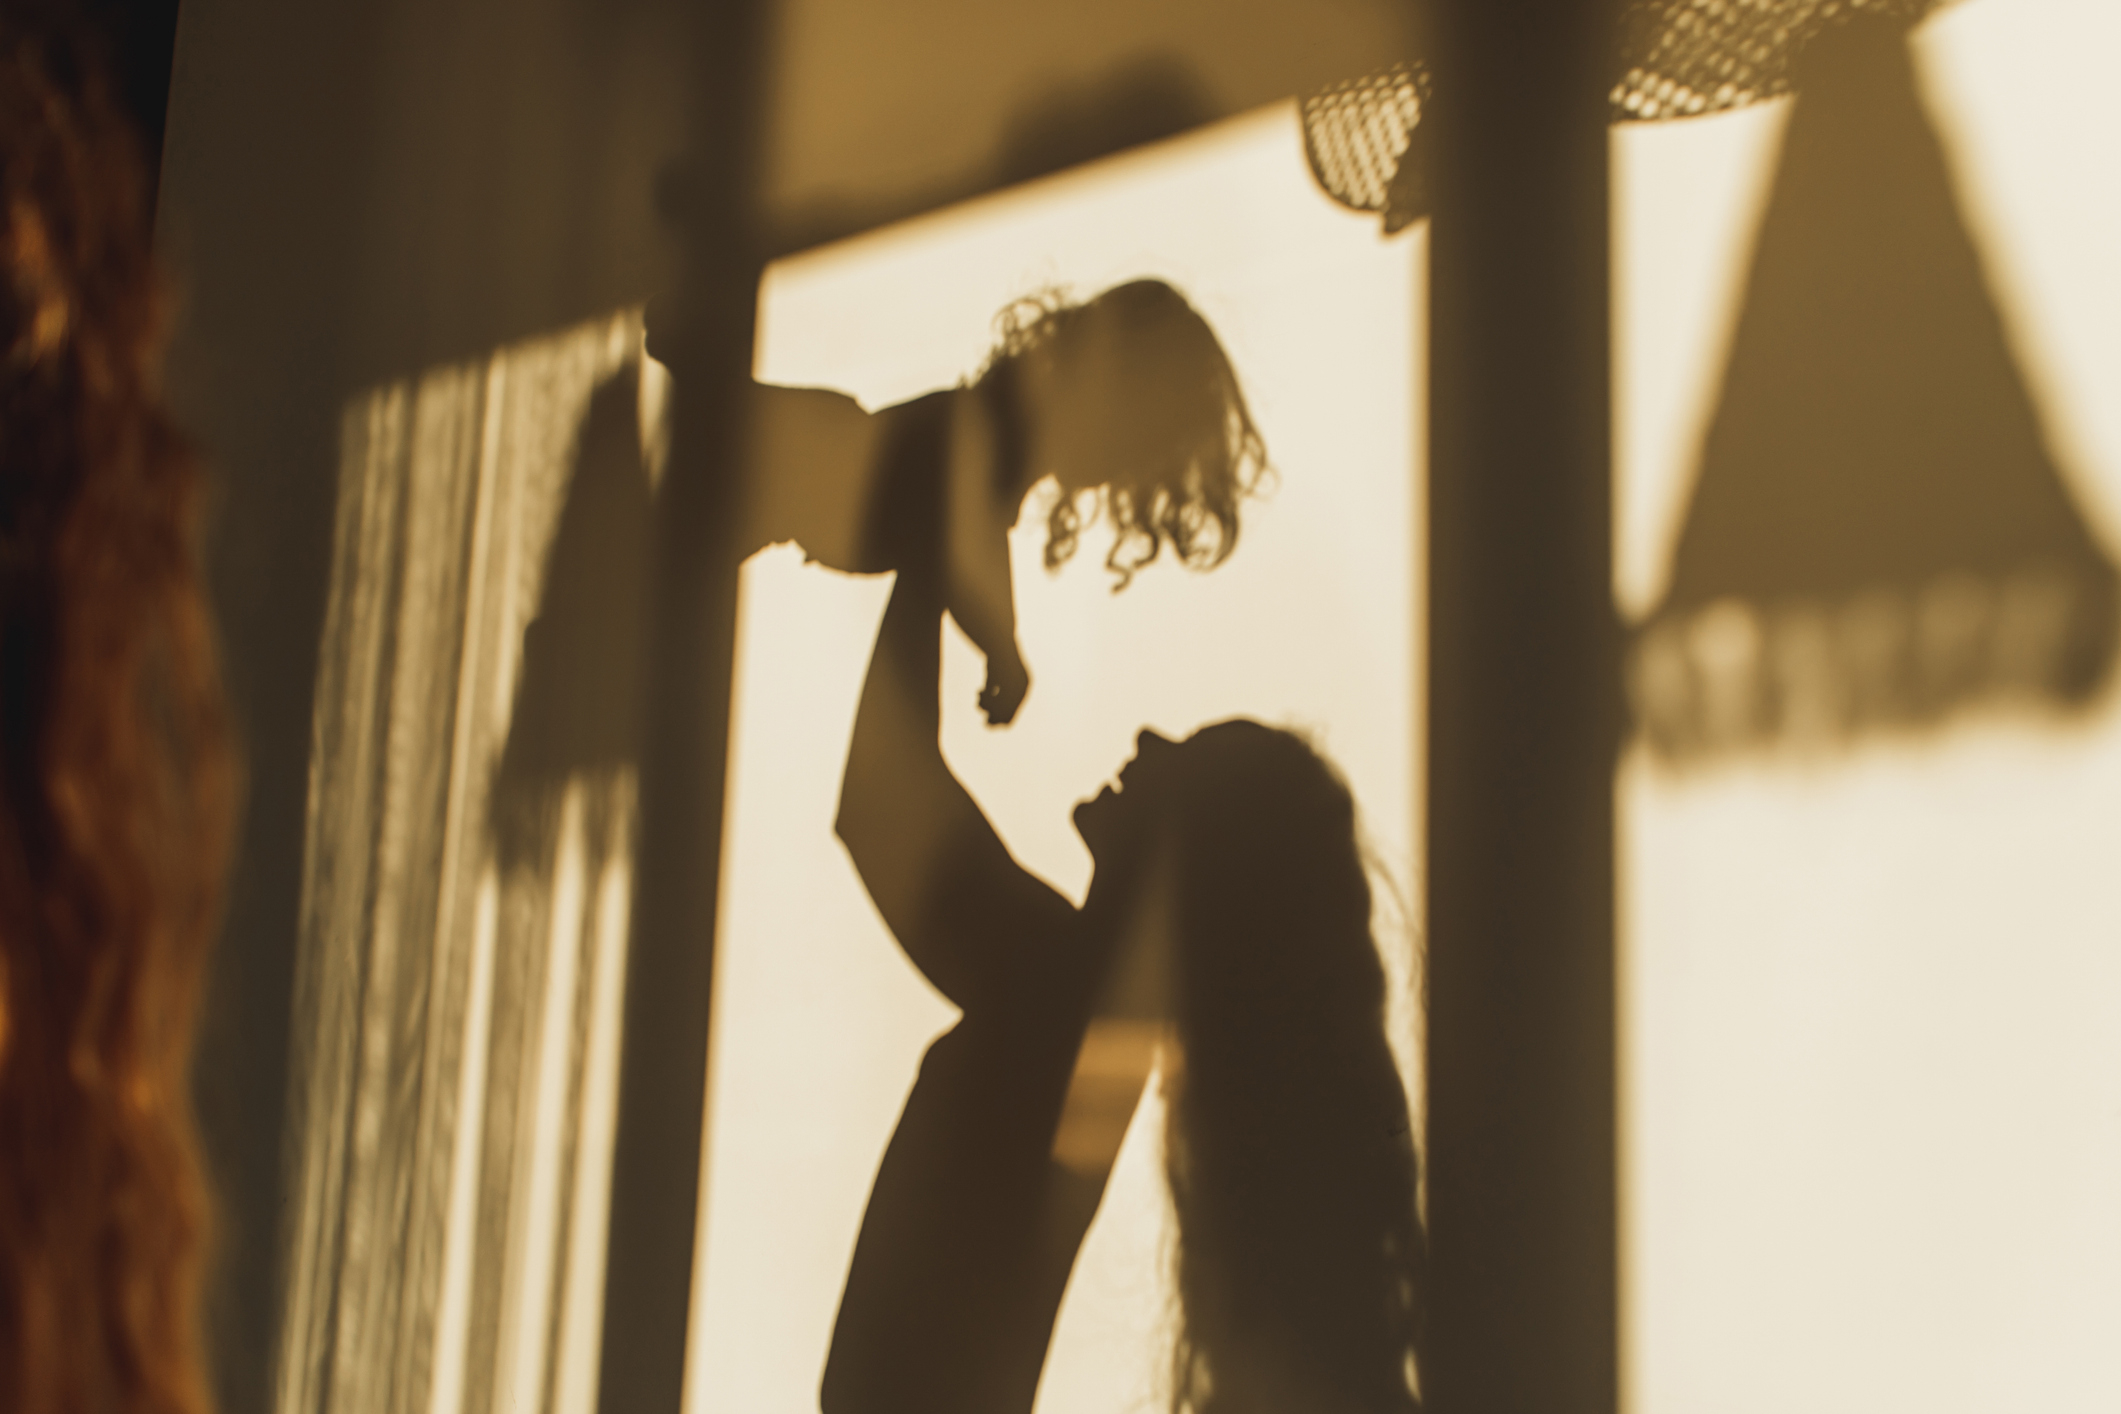 Silhouette of a mother lifting her child in the air, expressing joy and playfulness